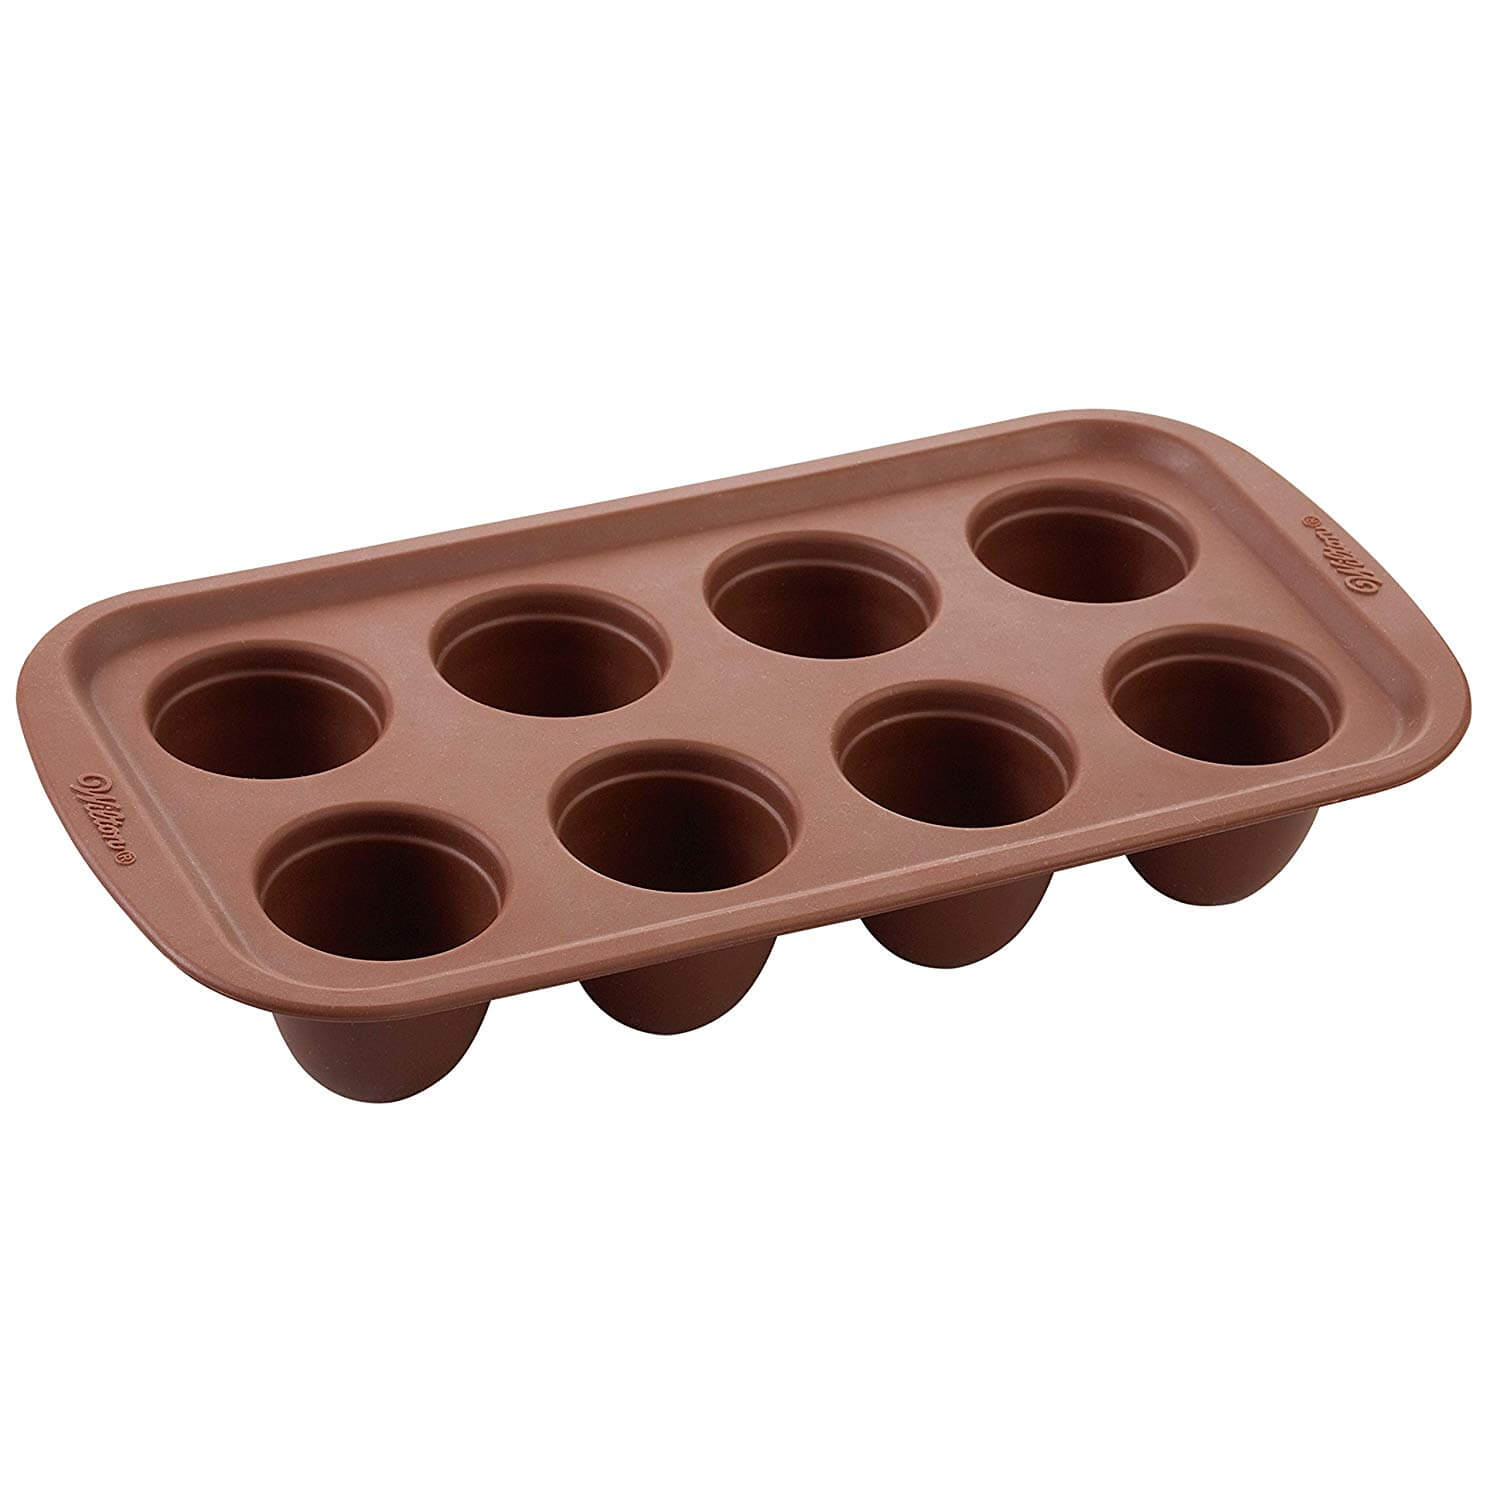 Wilton Brownie Pops Silicone Brownie and Cake Pop Pan